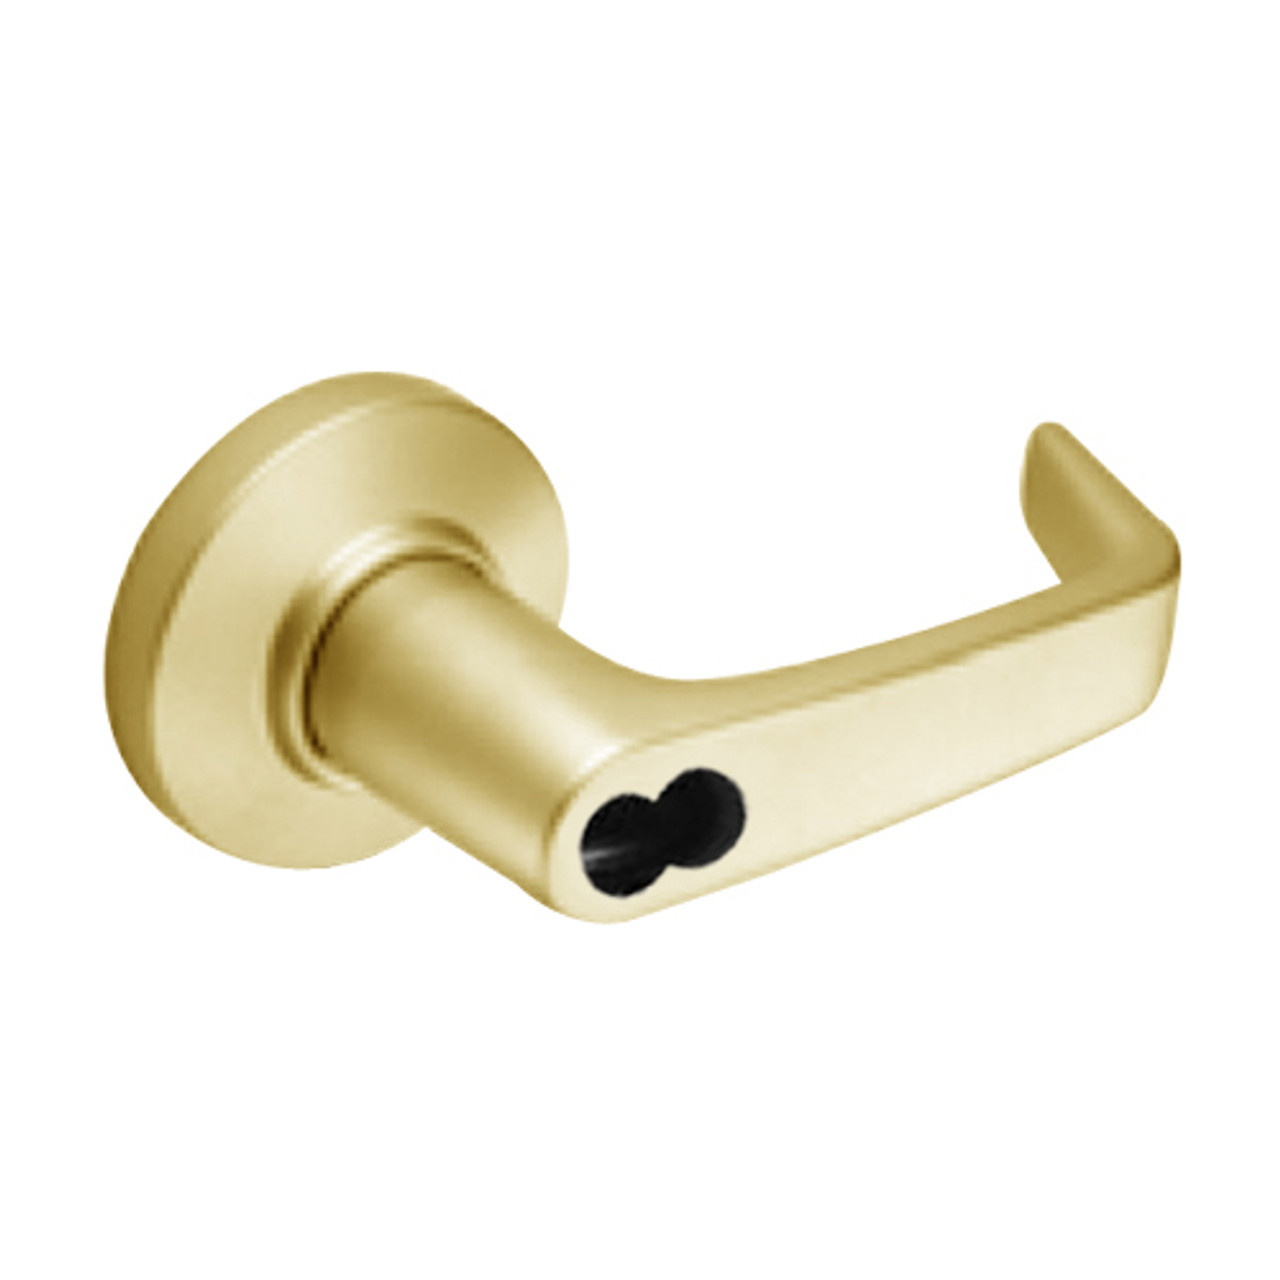 9K37A15CS3605LM Best 9K Series Dormitory or Storeroom Cylindrical Lever Locks with Contour Angle with Return Lever Design Accept 7 Pin Best Core in Bright Brass